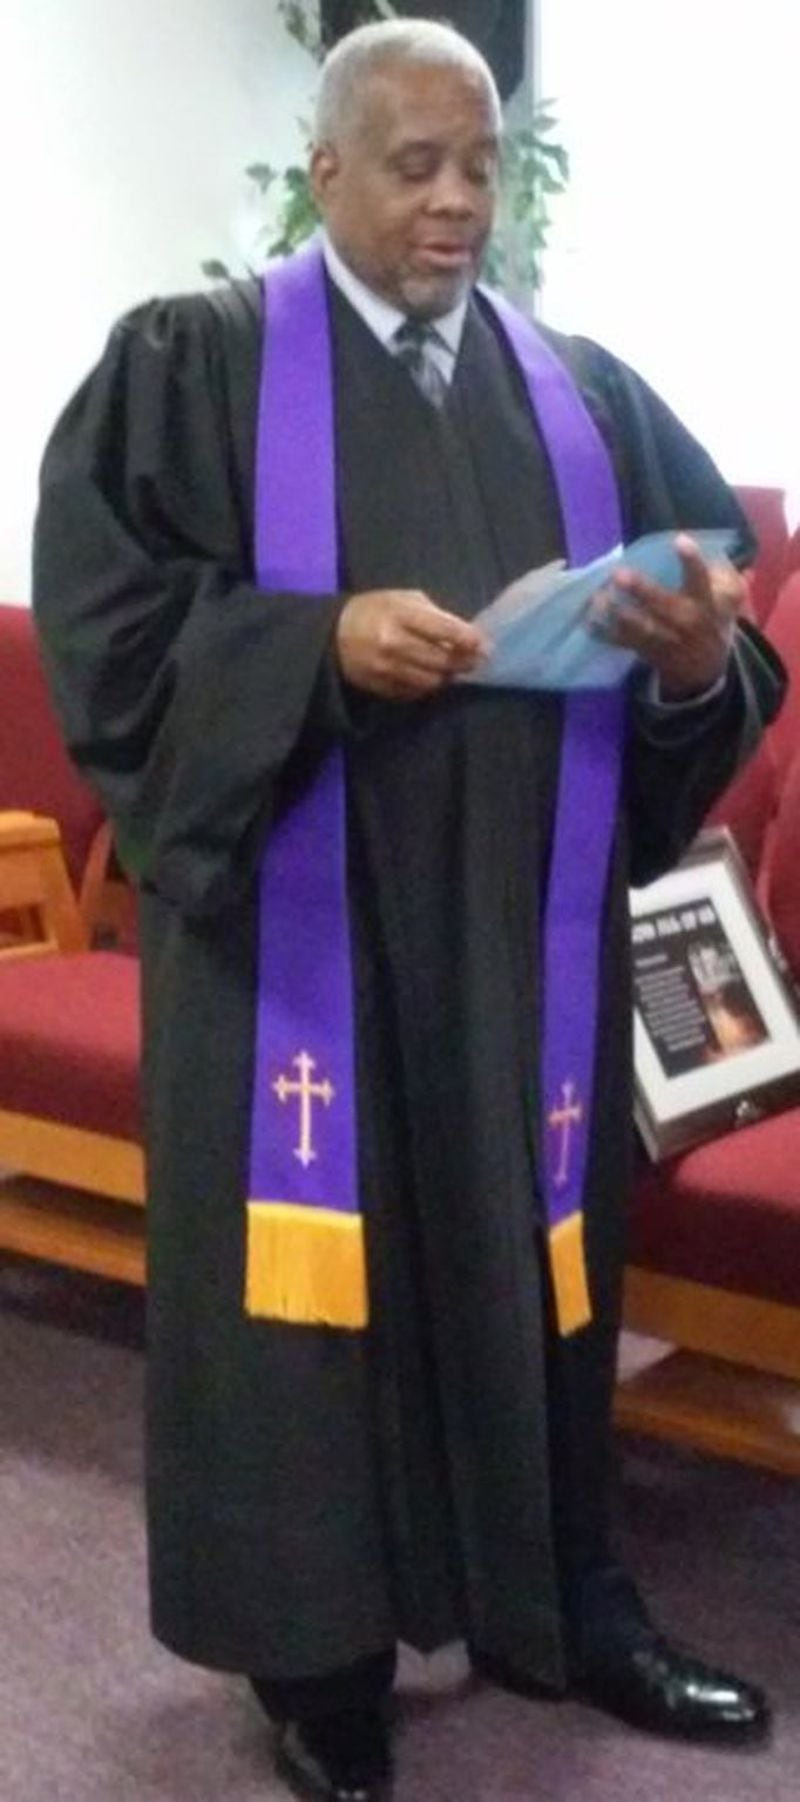 Pastor George Howard Terrell, 73 of Douglasville died May 1, 2020 from COVID-19.